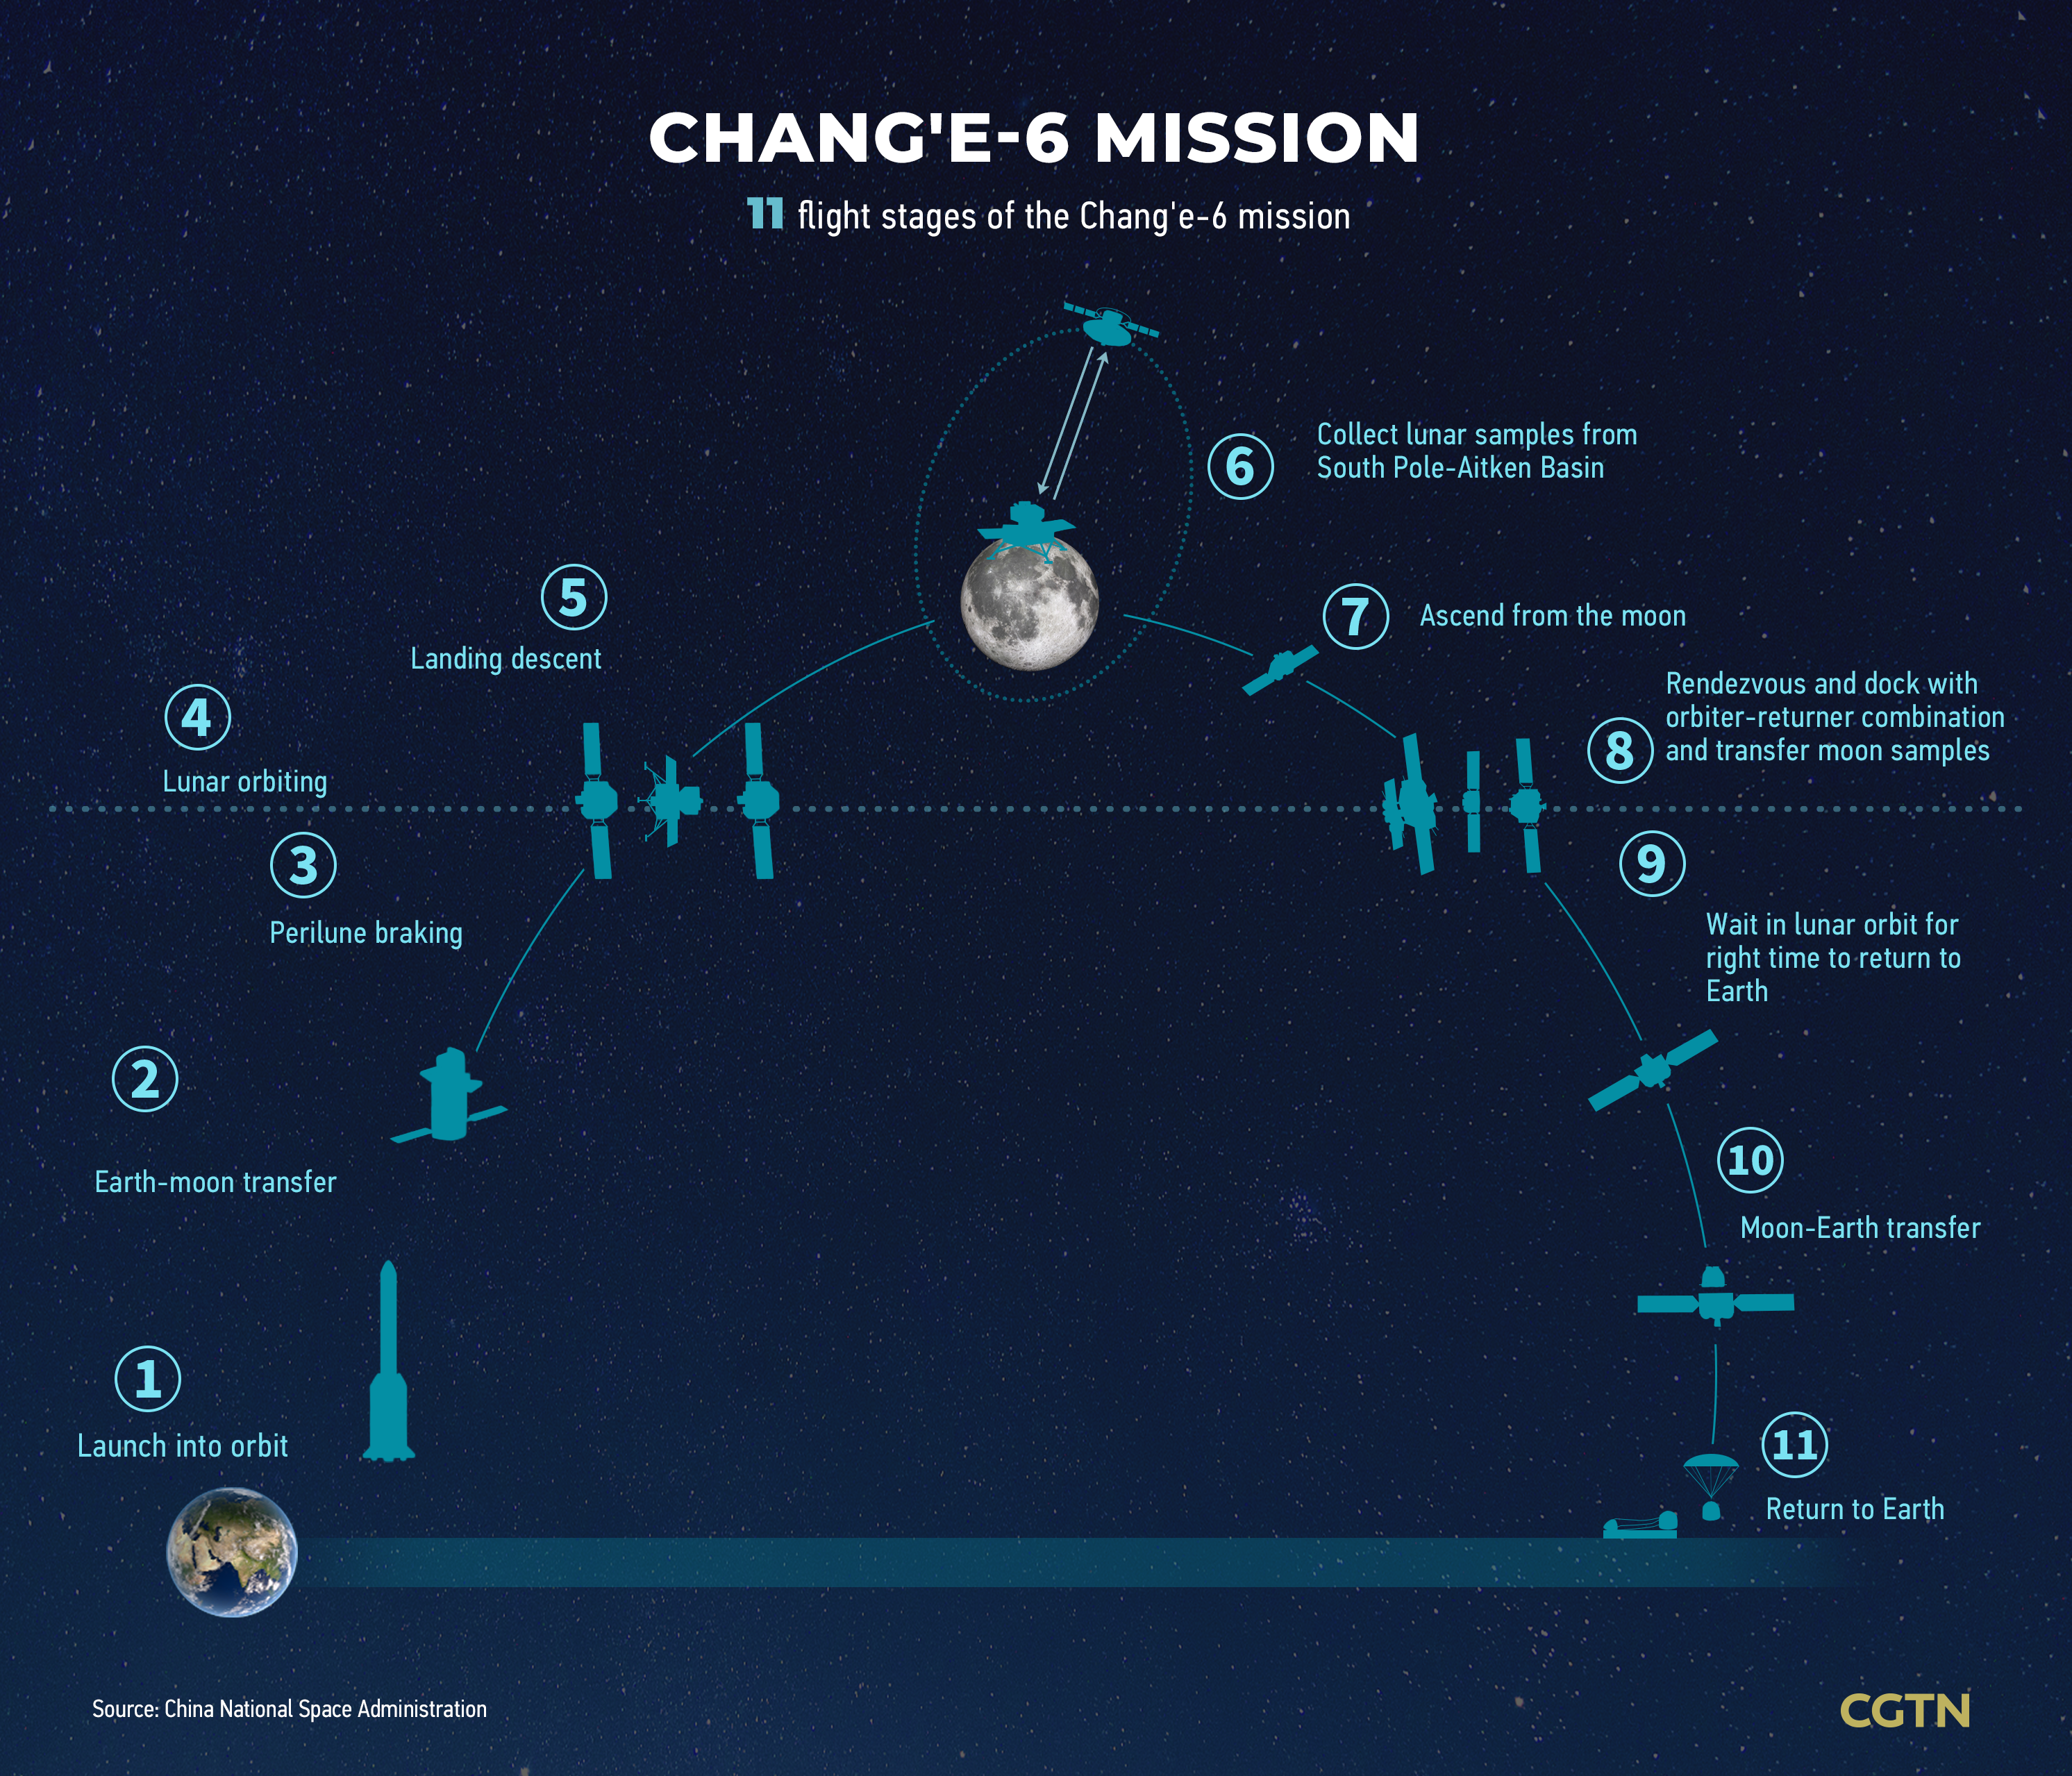 China's lunar exploration: What to expect from Chang'e-6 mission